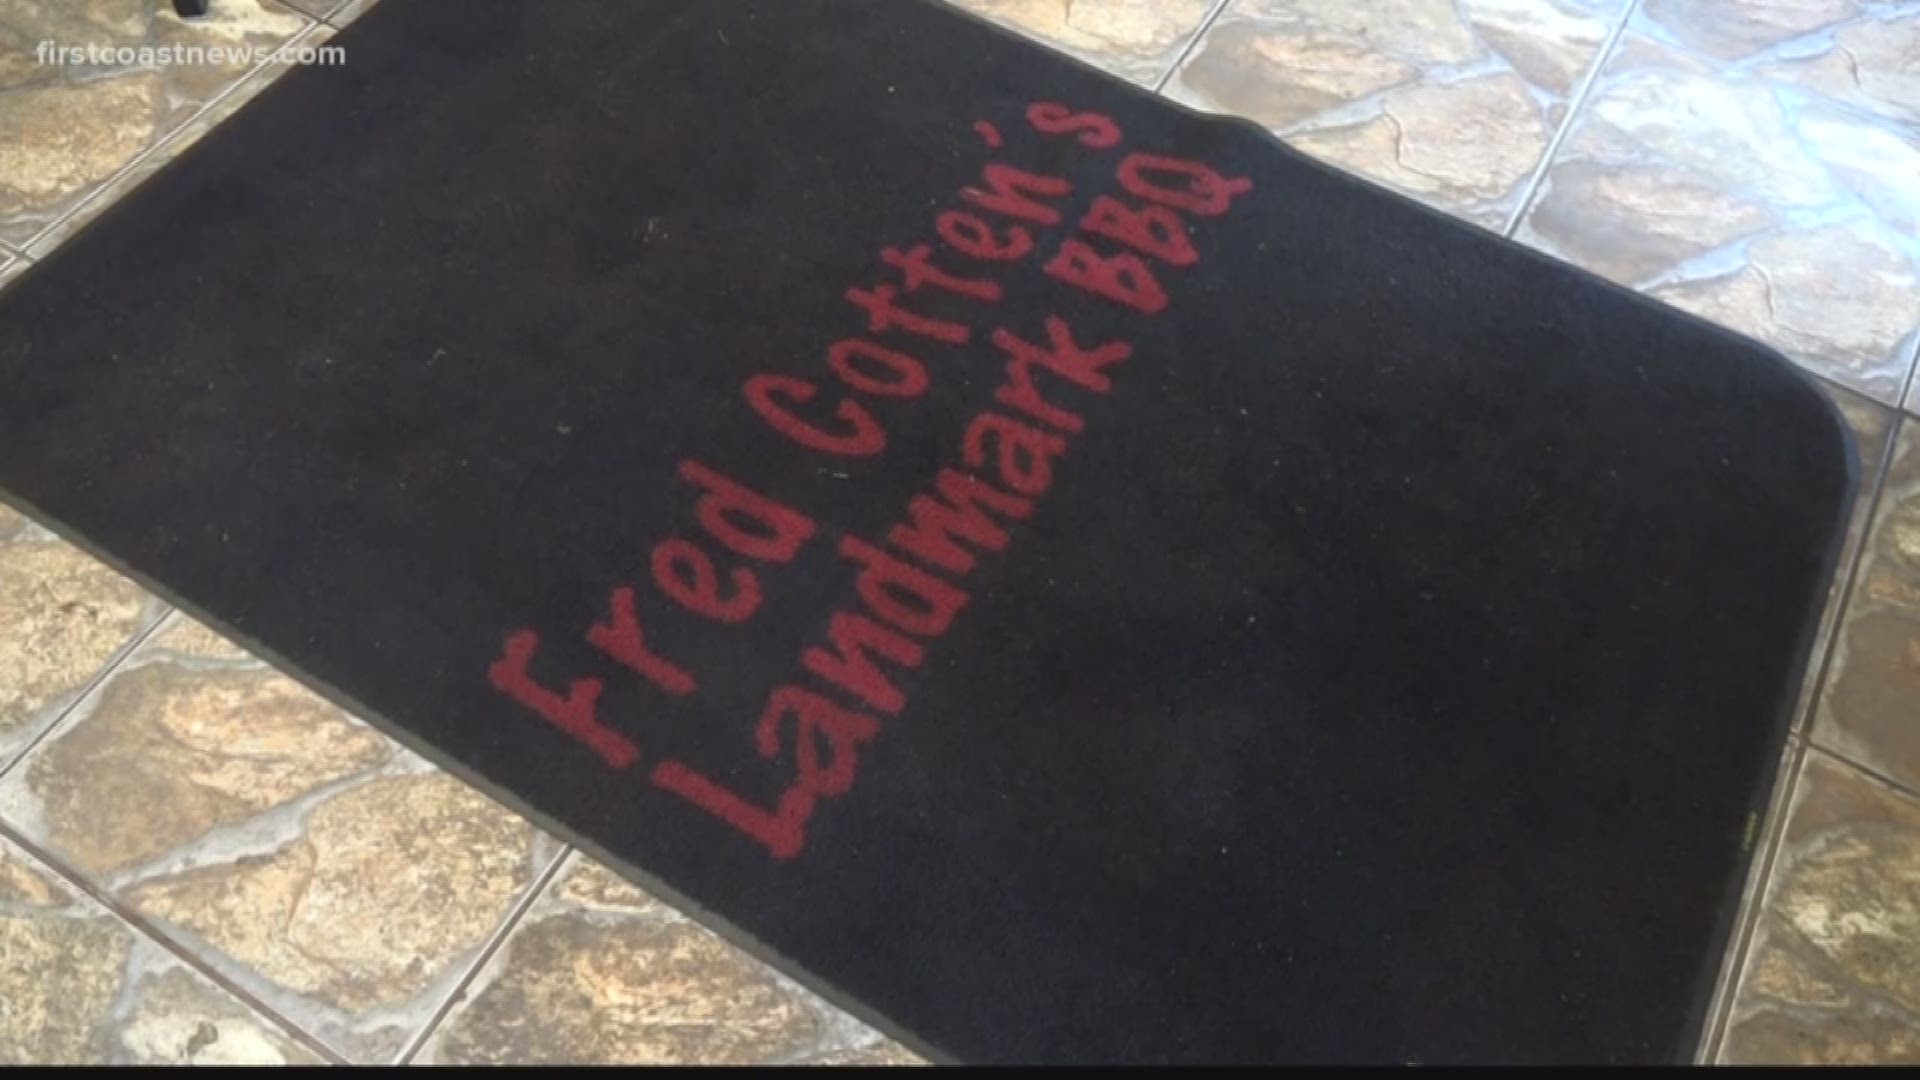 A Jacksonville restaurant is stepping up to show their support for a law enforcement family who now has to experience Christmas without a mother.